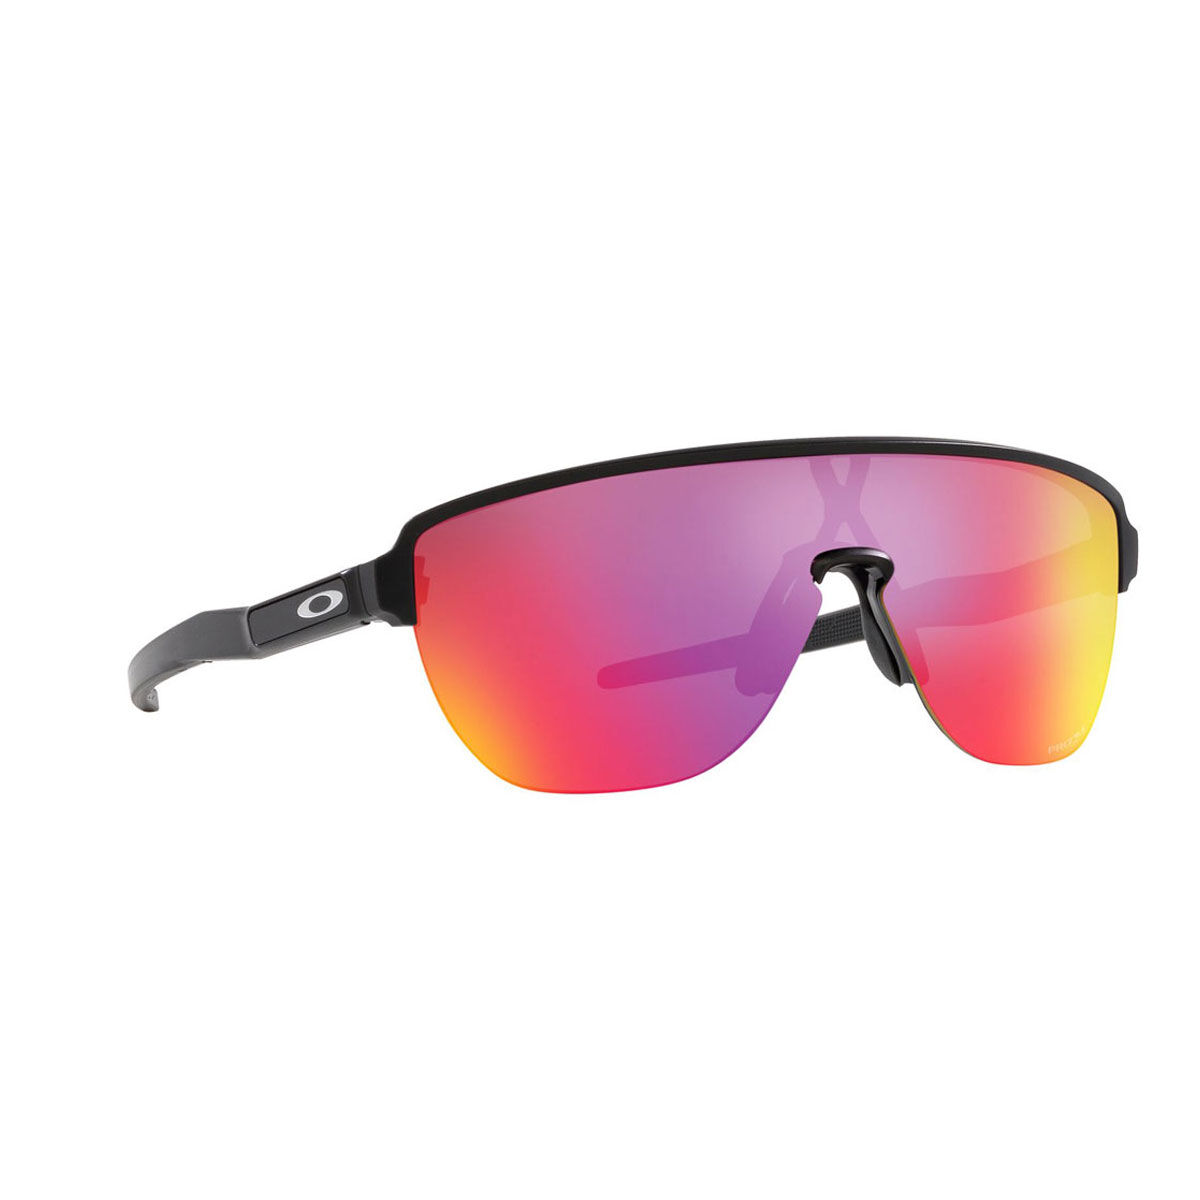 Buy BAVINCIS Rebel Glossy Black And Black Edition Sunglasses at Amazon.in